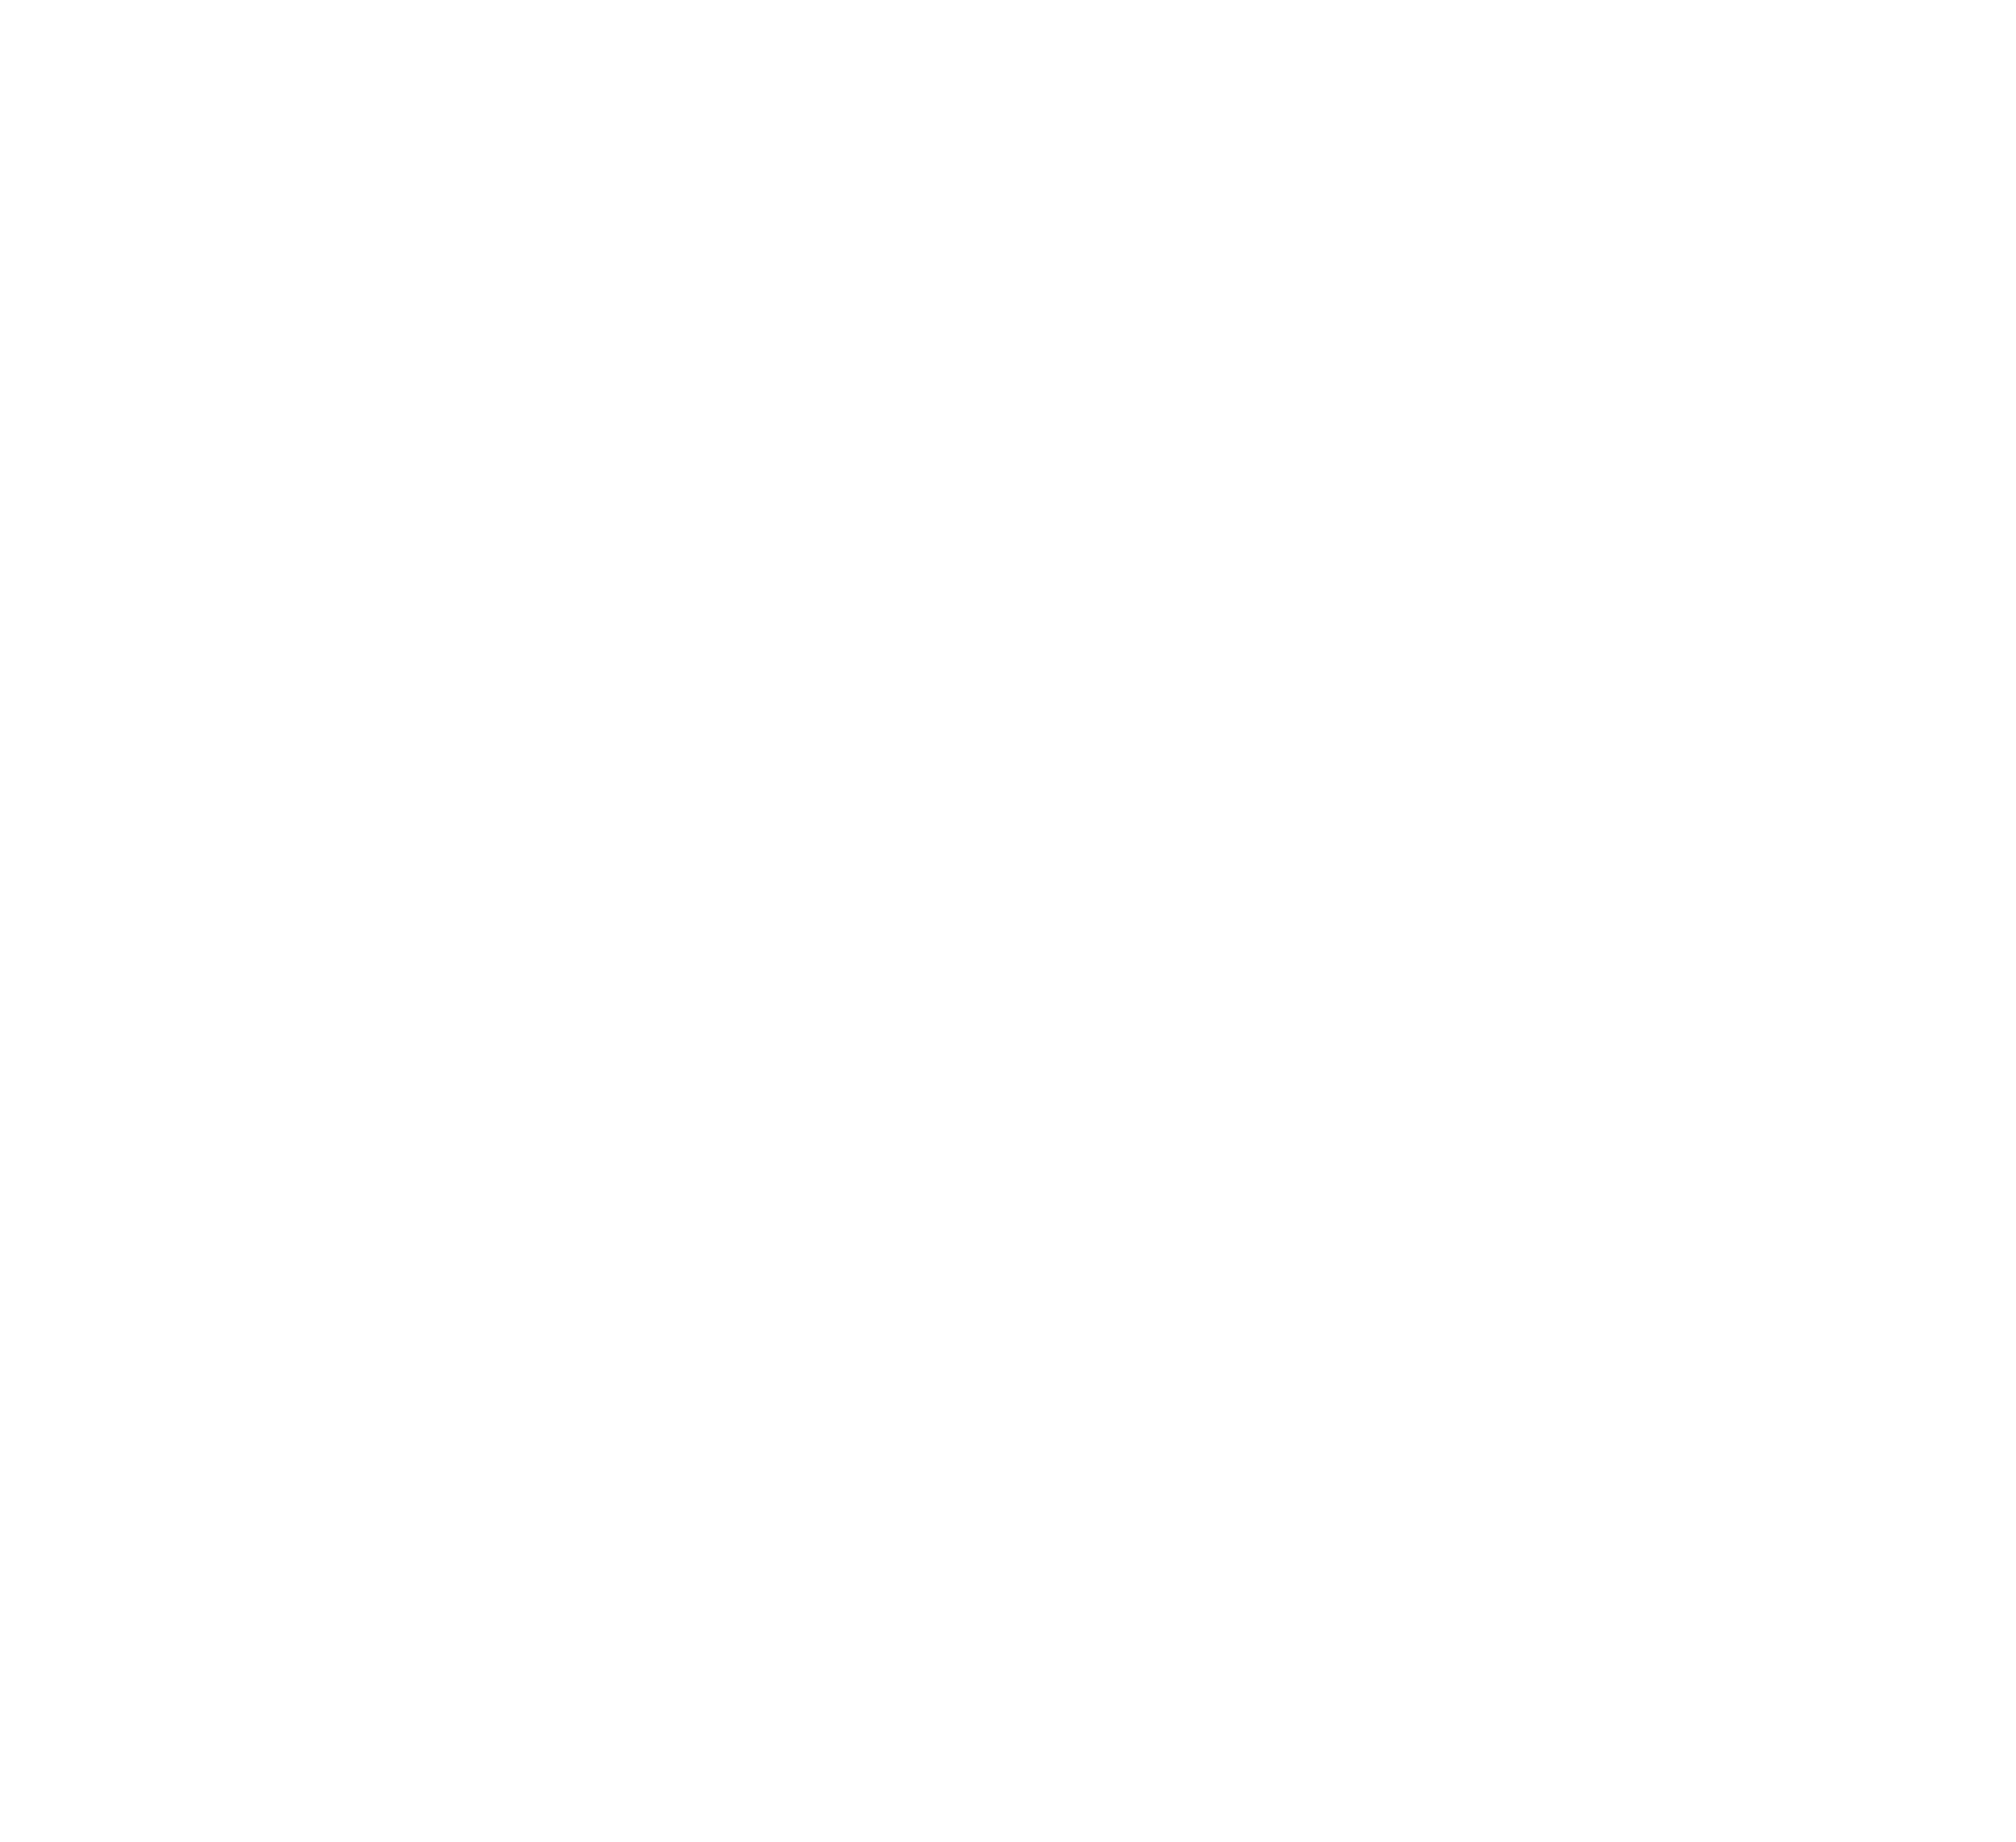 Logo of the iso 9001:2015 standard